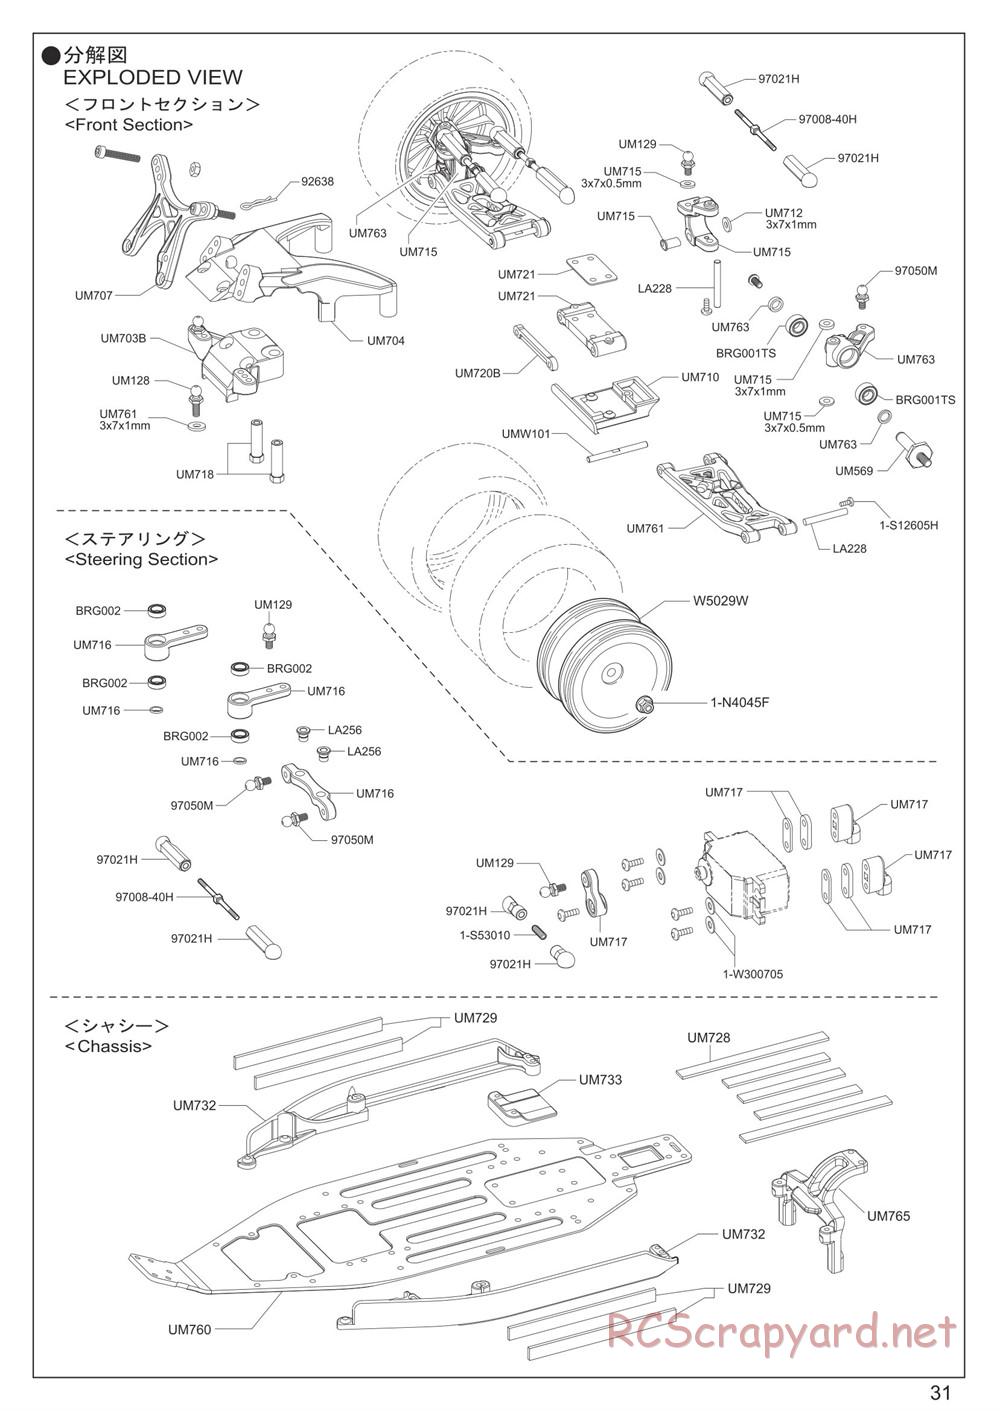 Kyosho - Ultima RB7 - Manual - Page 31